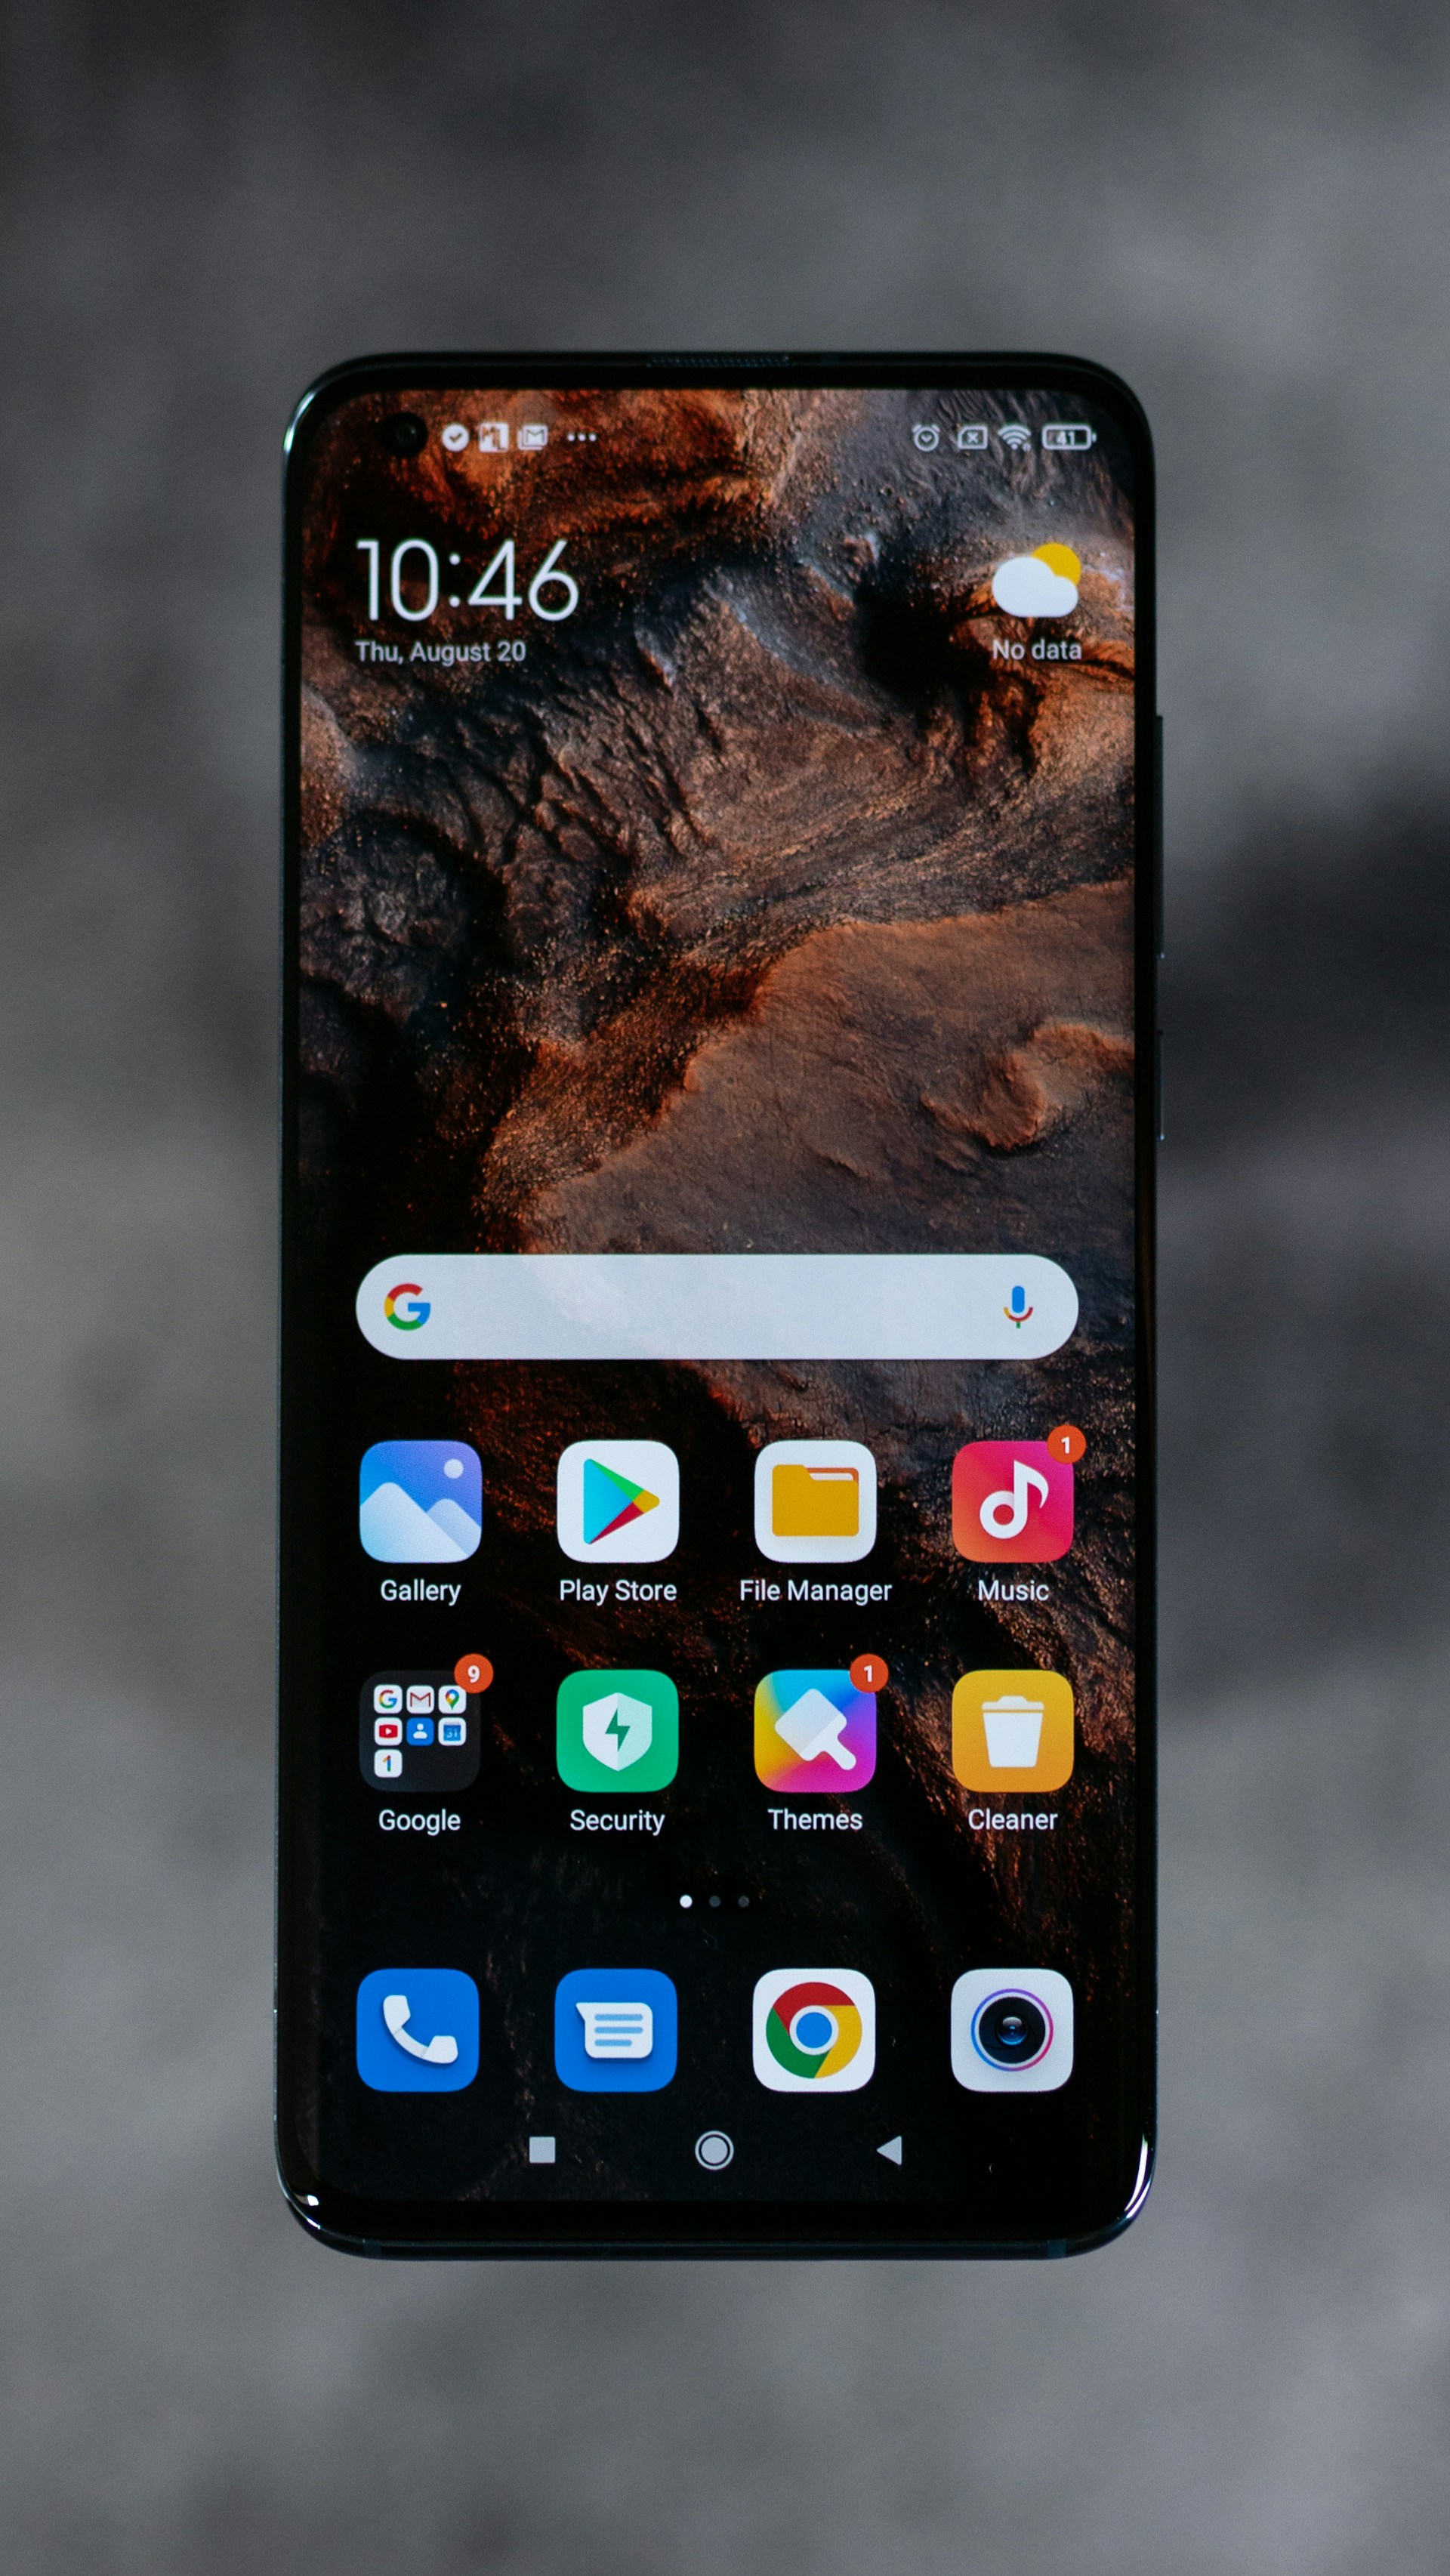 iphone screen showing icons on screen